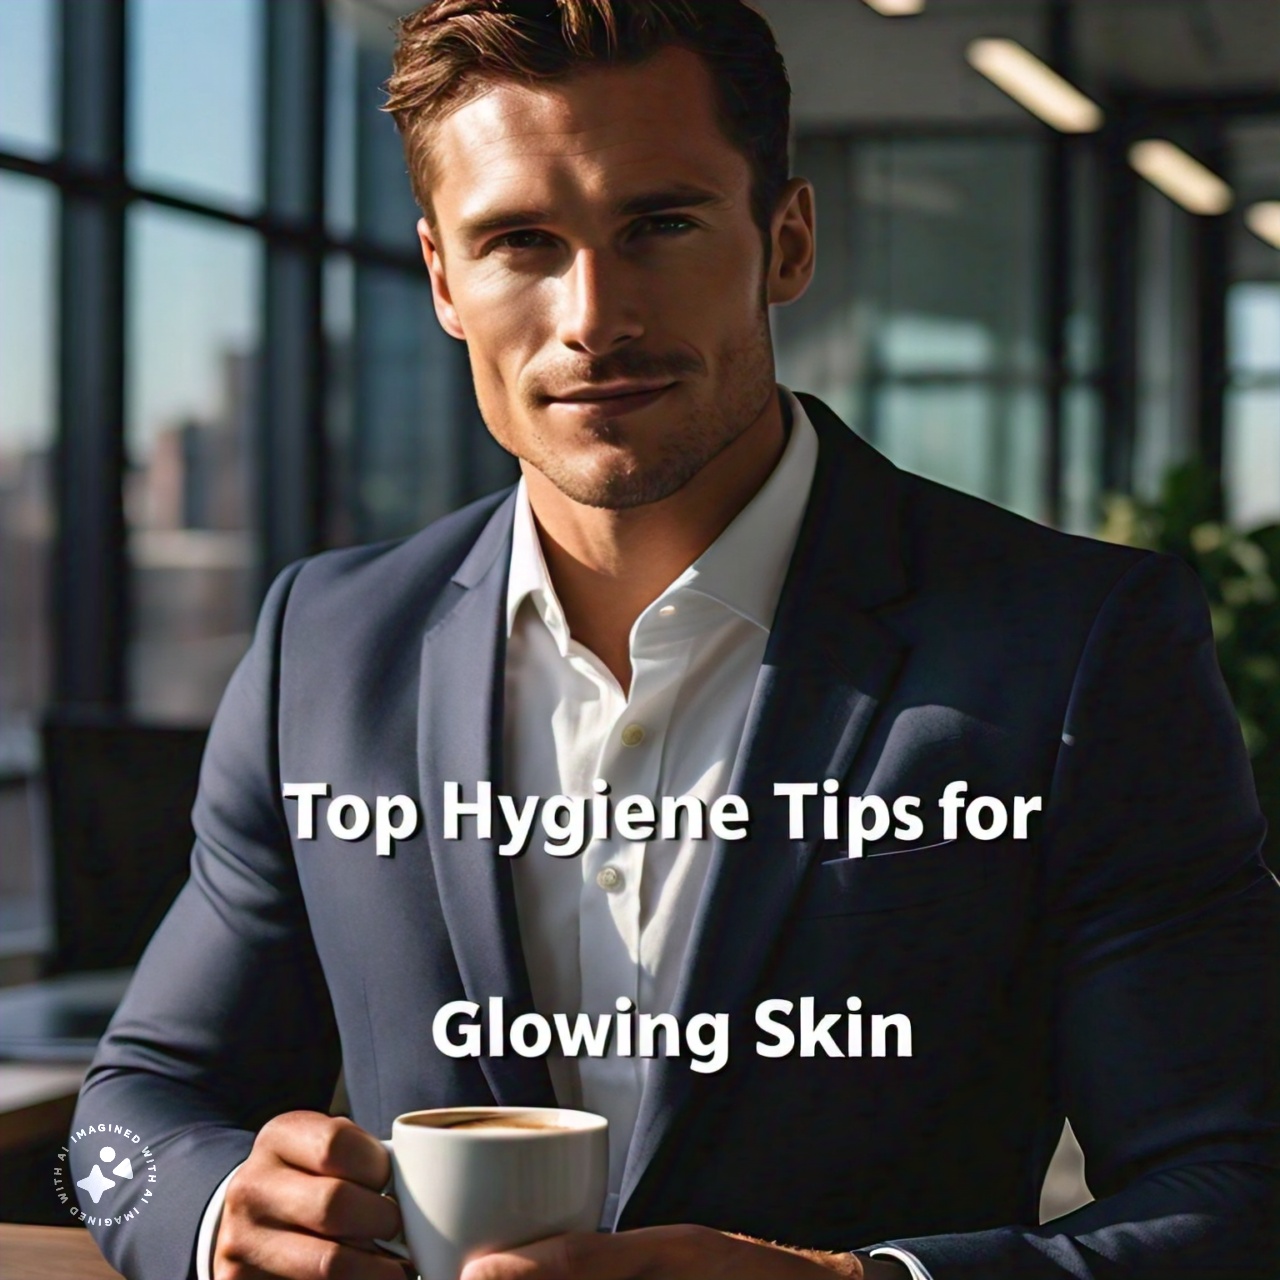 Top Hygiene Tips for Glowing Skin